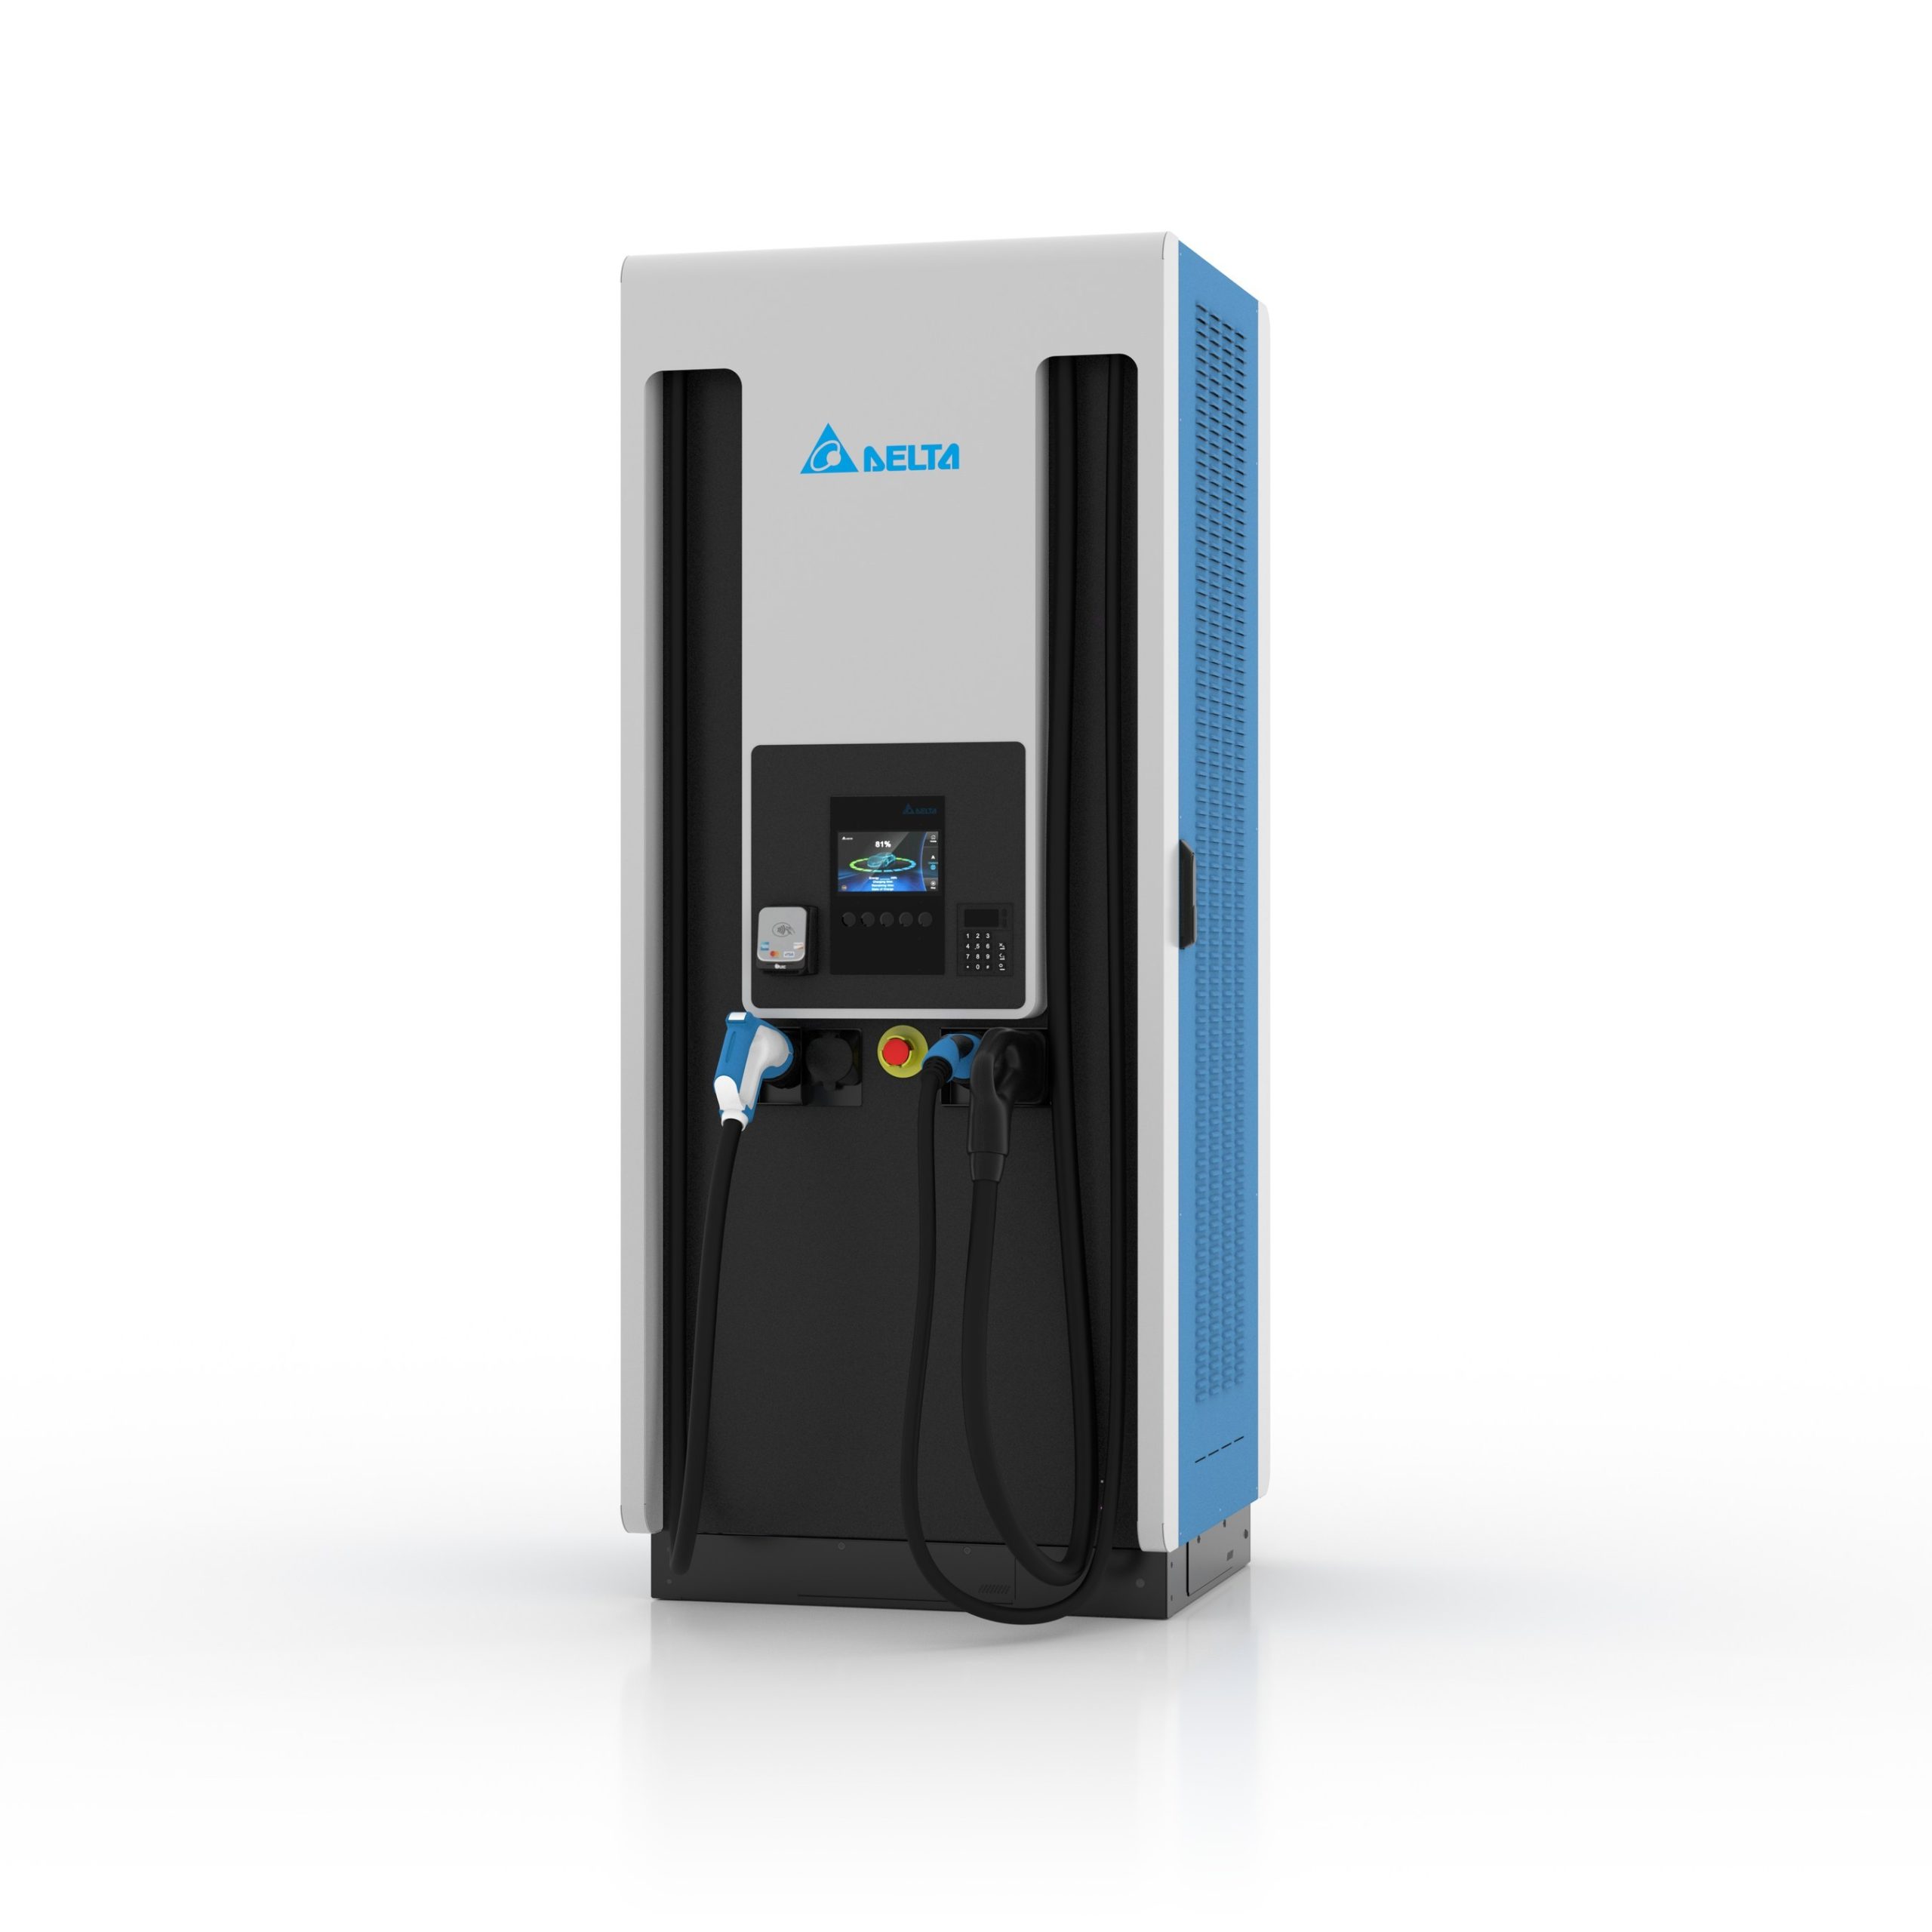 Delta Launches 200kW Ultra Fast Electric Vehicle (EV) Charger in EMEA New